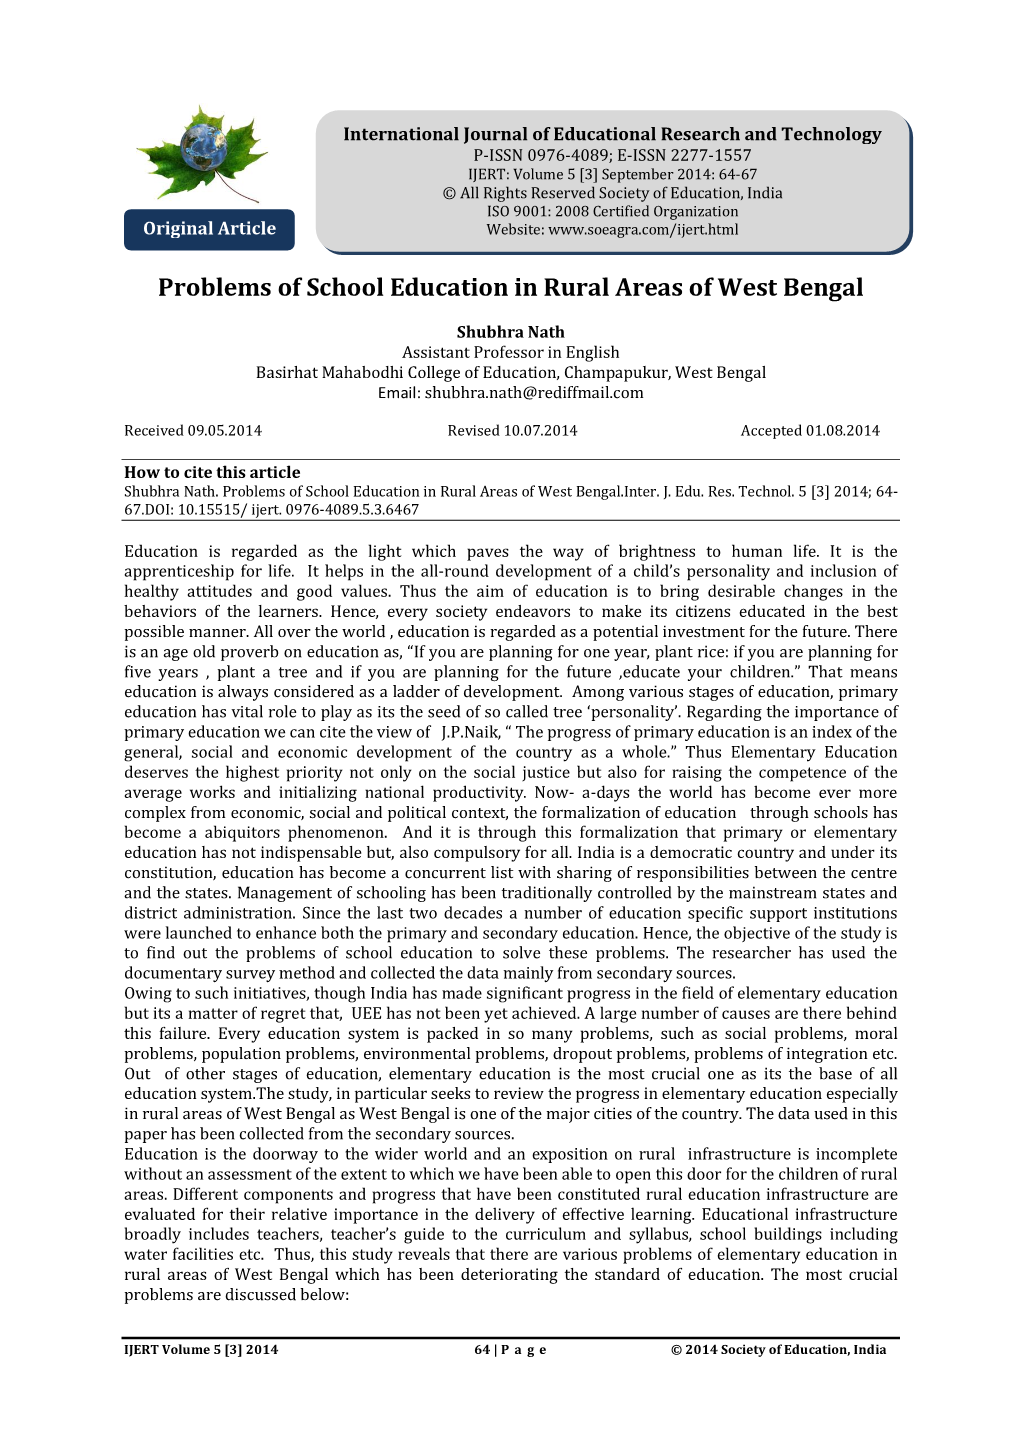 Problems of School Education in Rural Areas of West Bengal